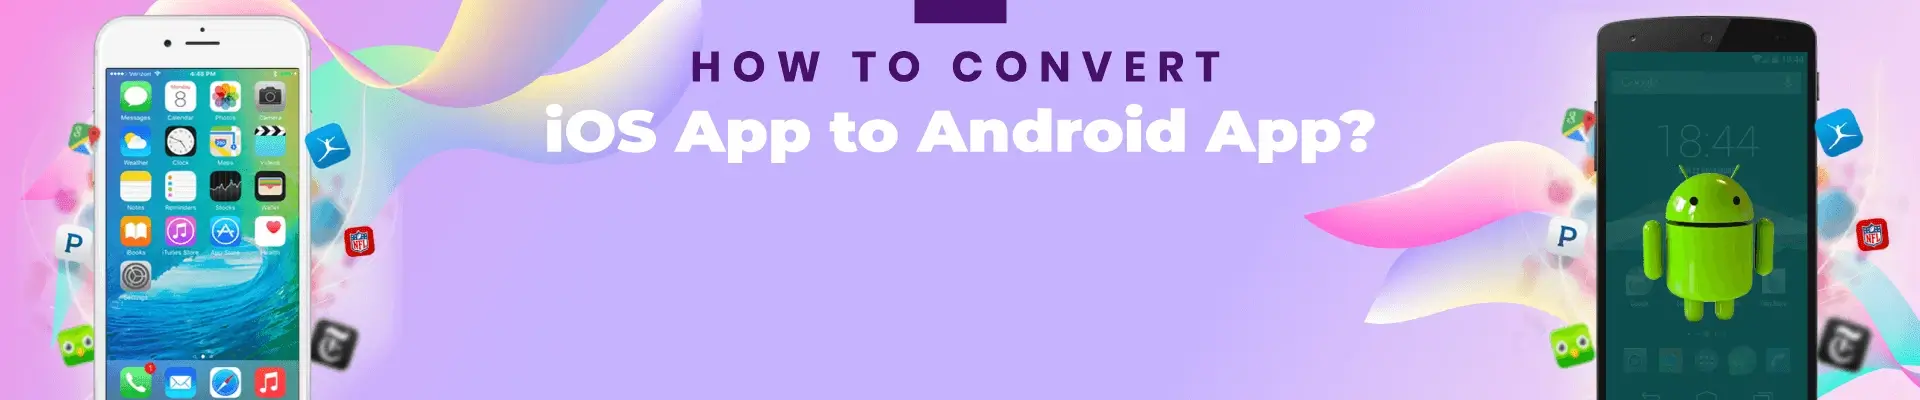 How to Convert iOS App to Android App - cover